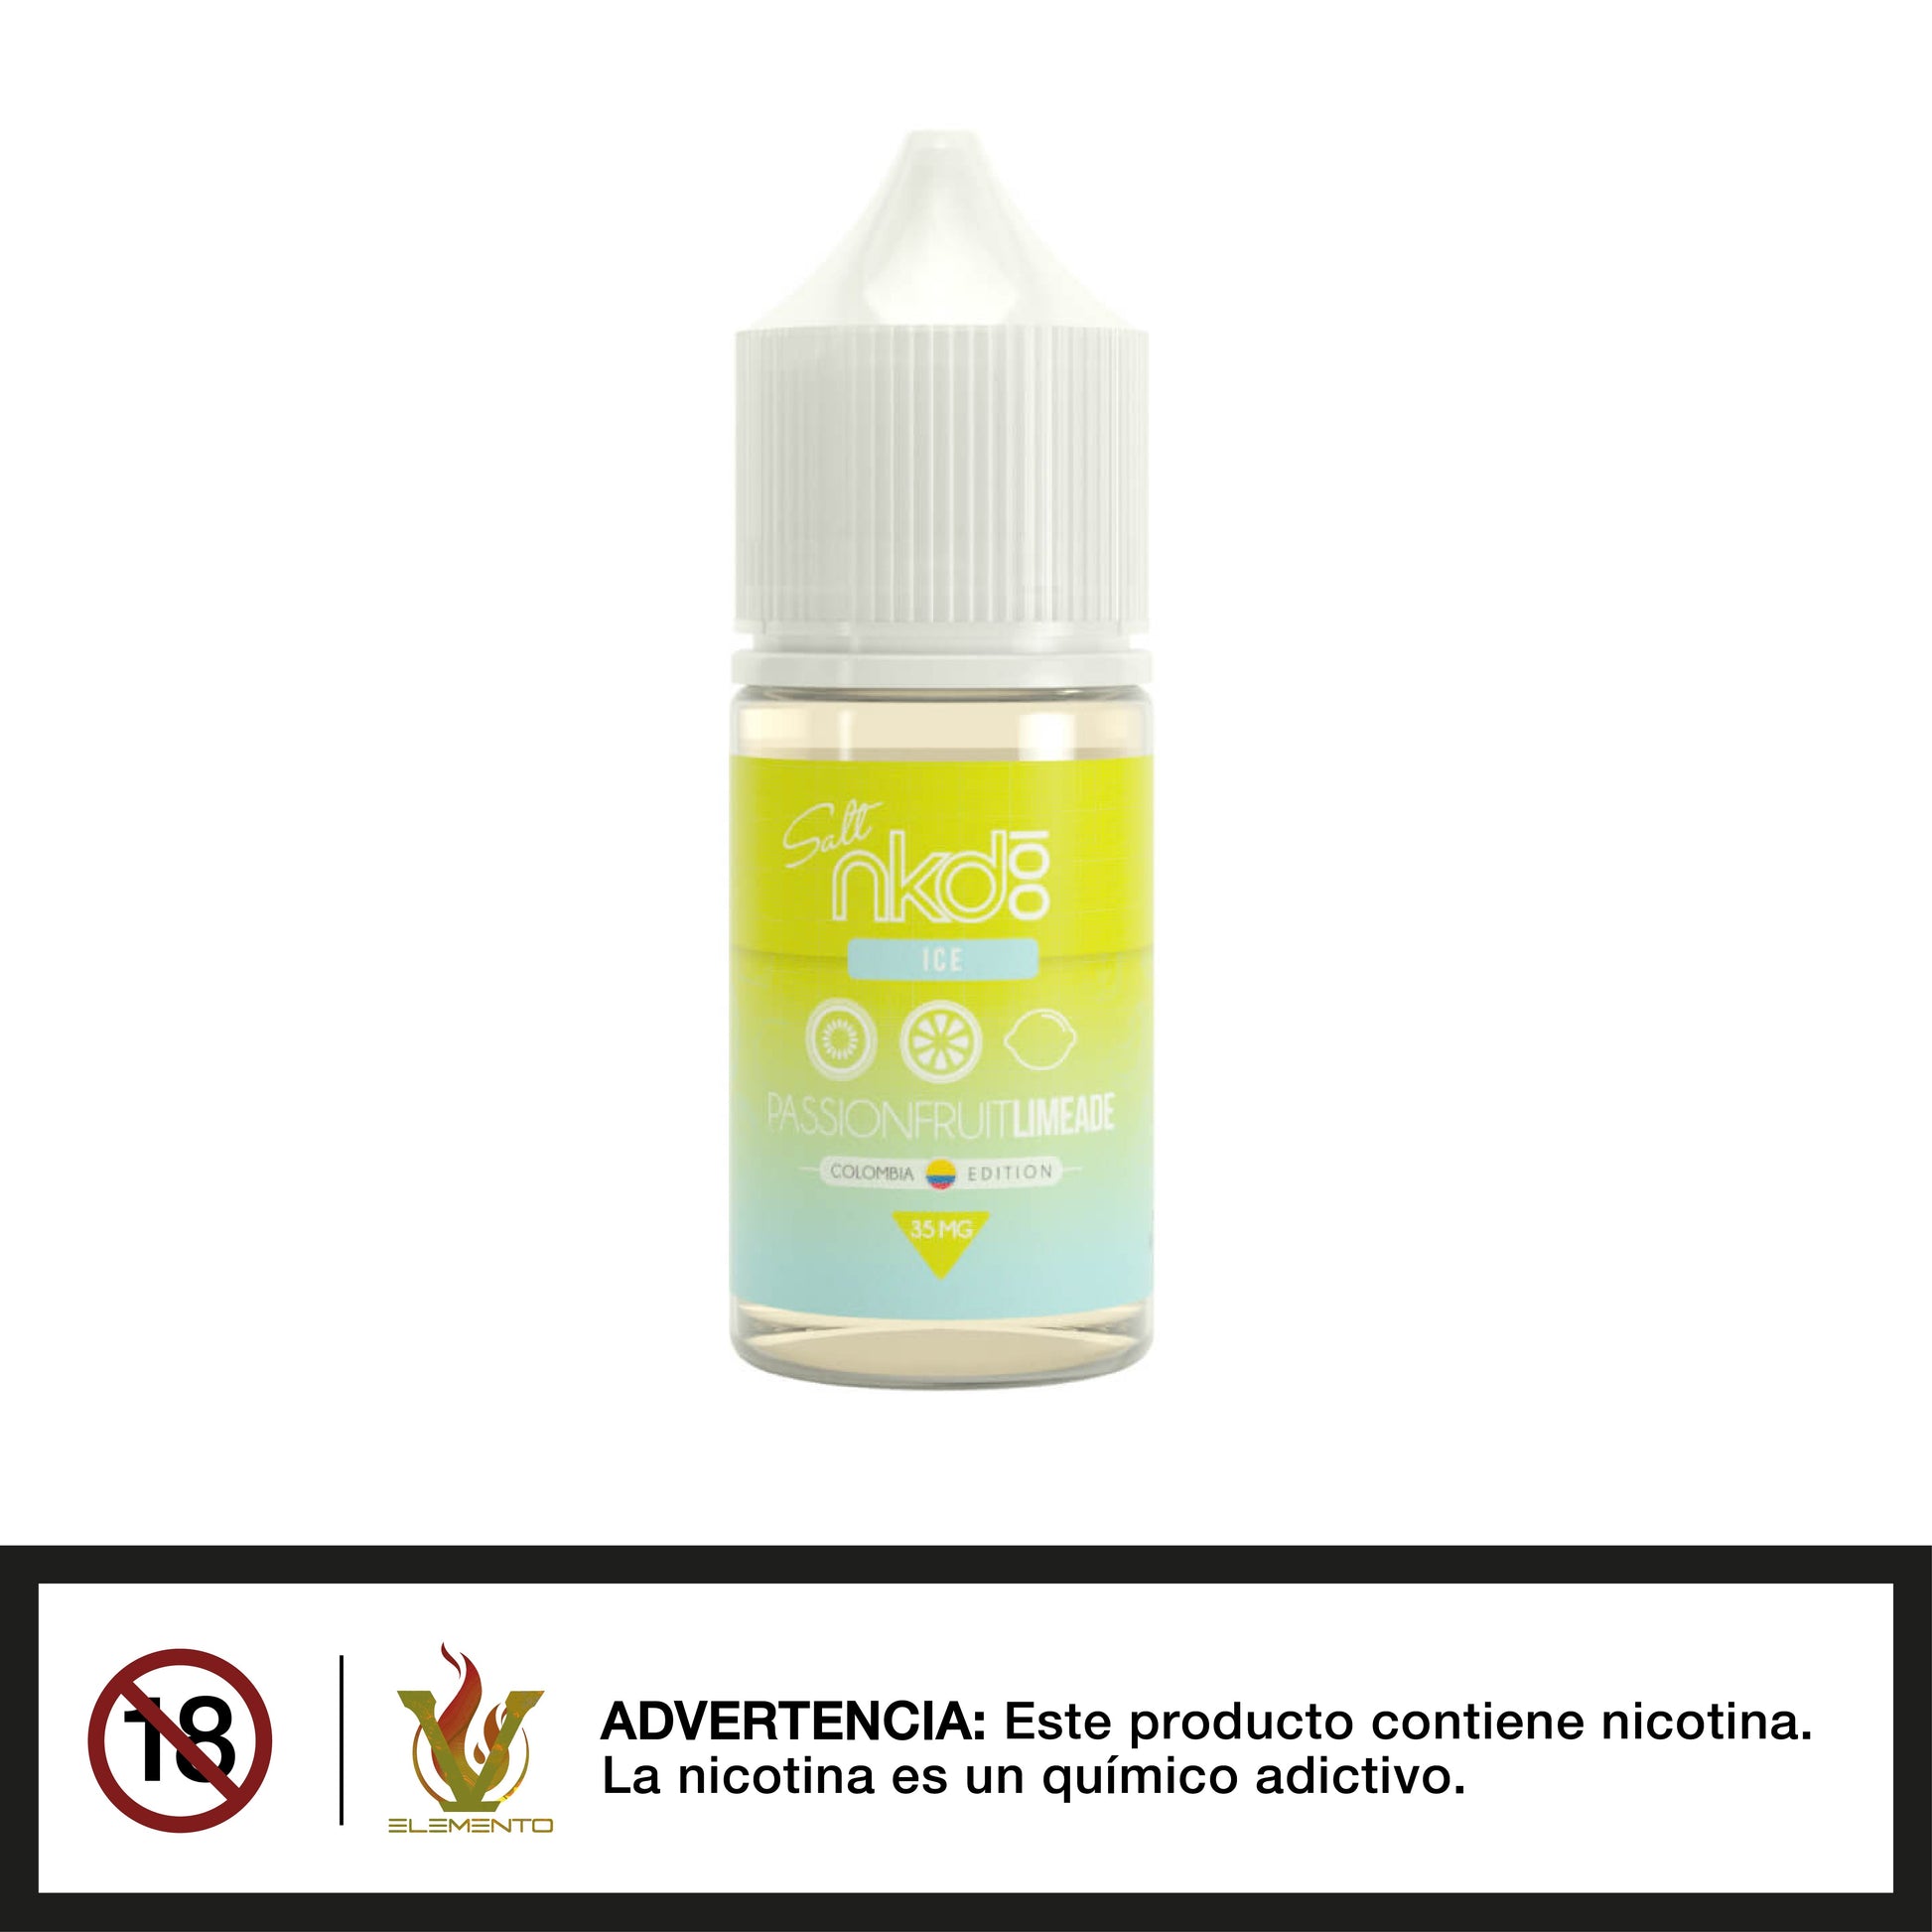 Naked 100 Colombia Edition Salt - Passionfruit Limeade Ice 30ml - Quinto Elemento Vap